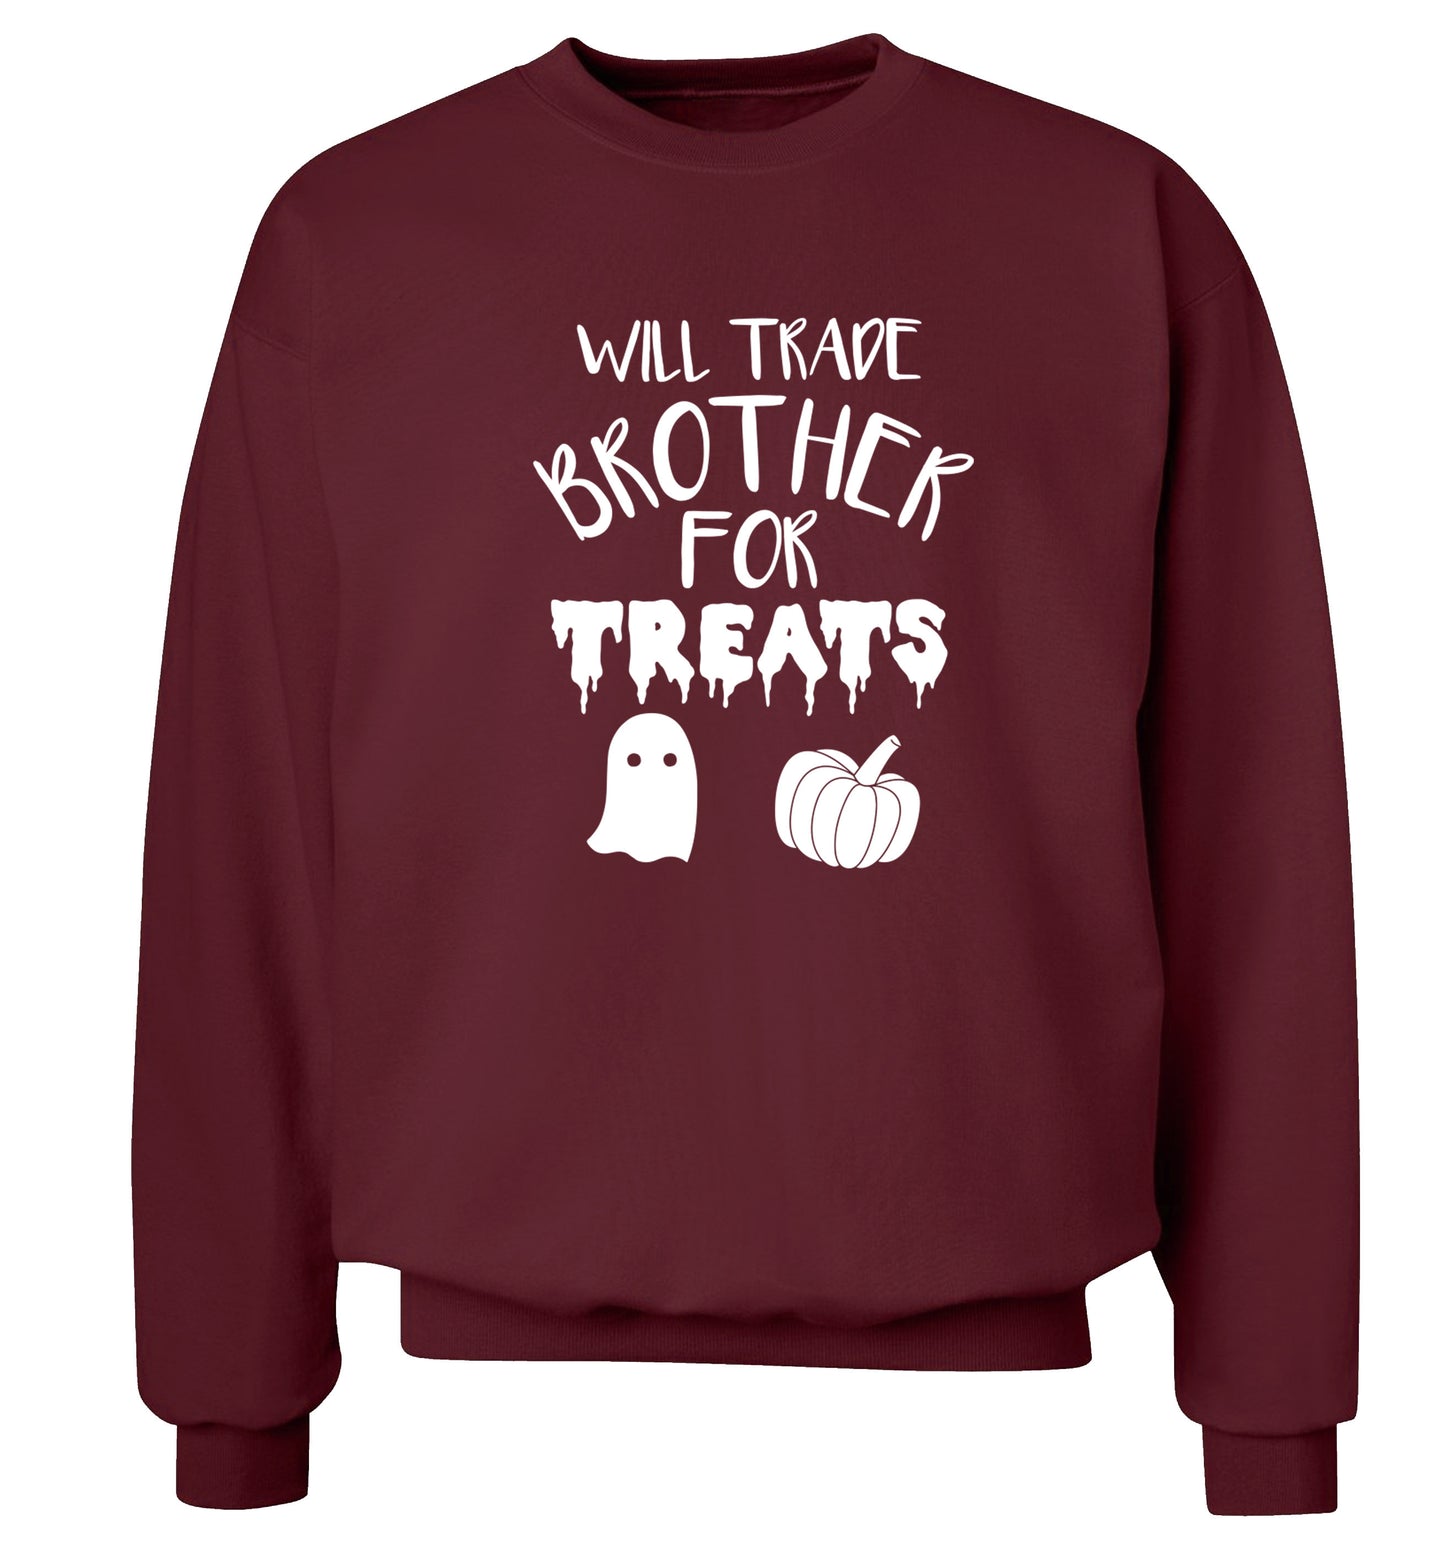 Will trade brother for treats Adult's unisex maroon Sweater 2XL